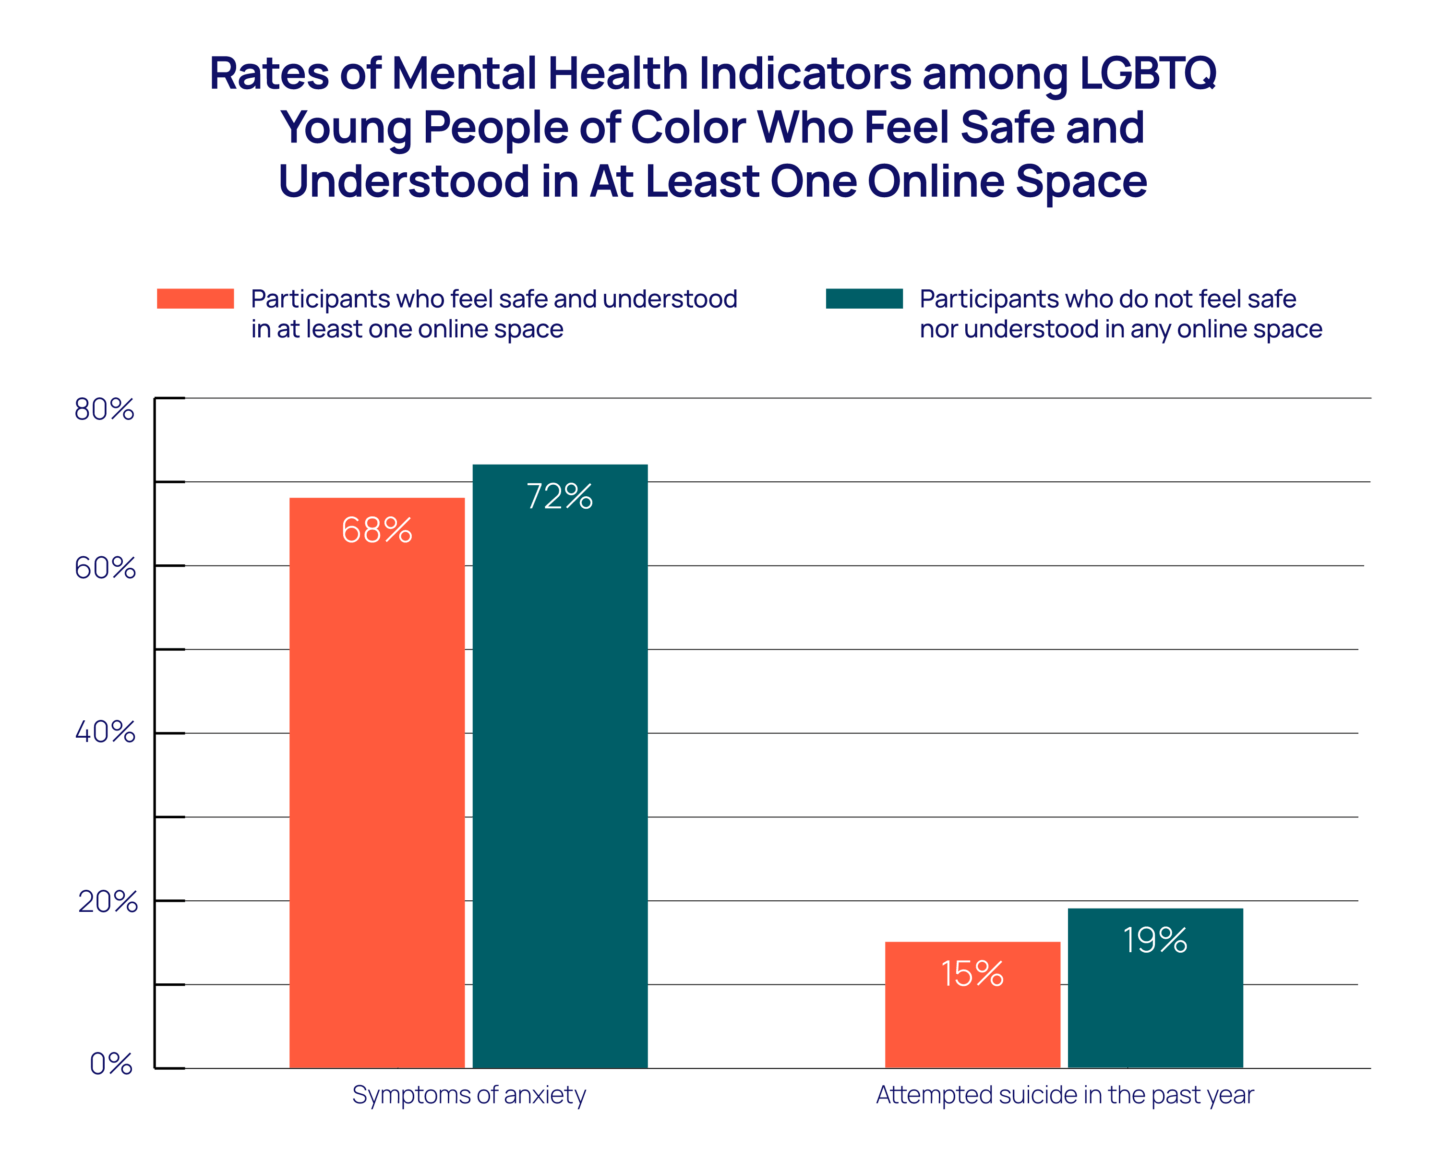 Rates of Mental Health Indicators among LGBTQ Young People of Color Who Feel Safe and Understood in at least One Online Space bar chart